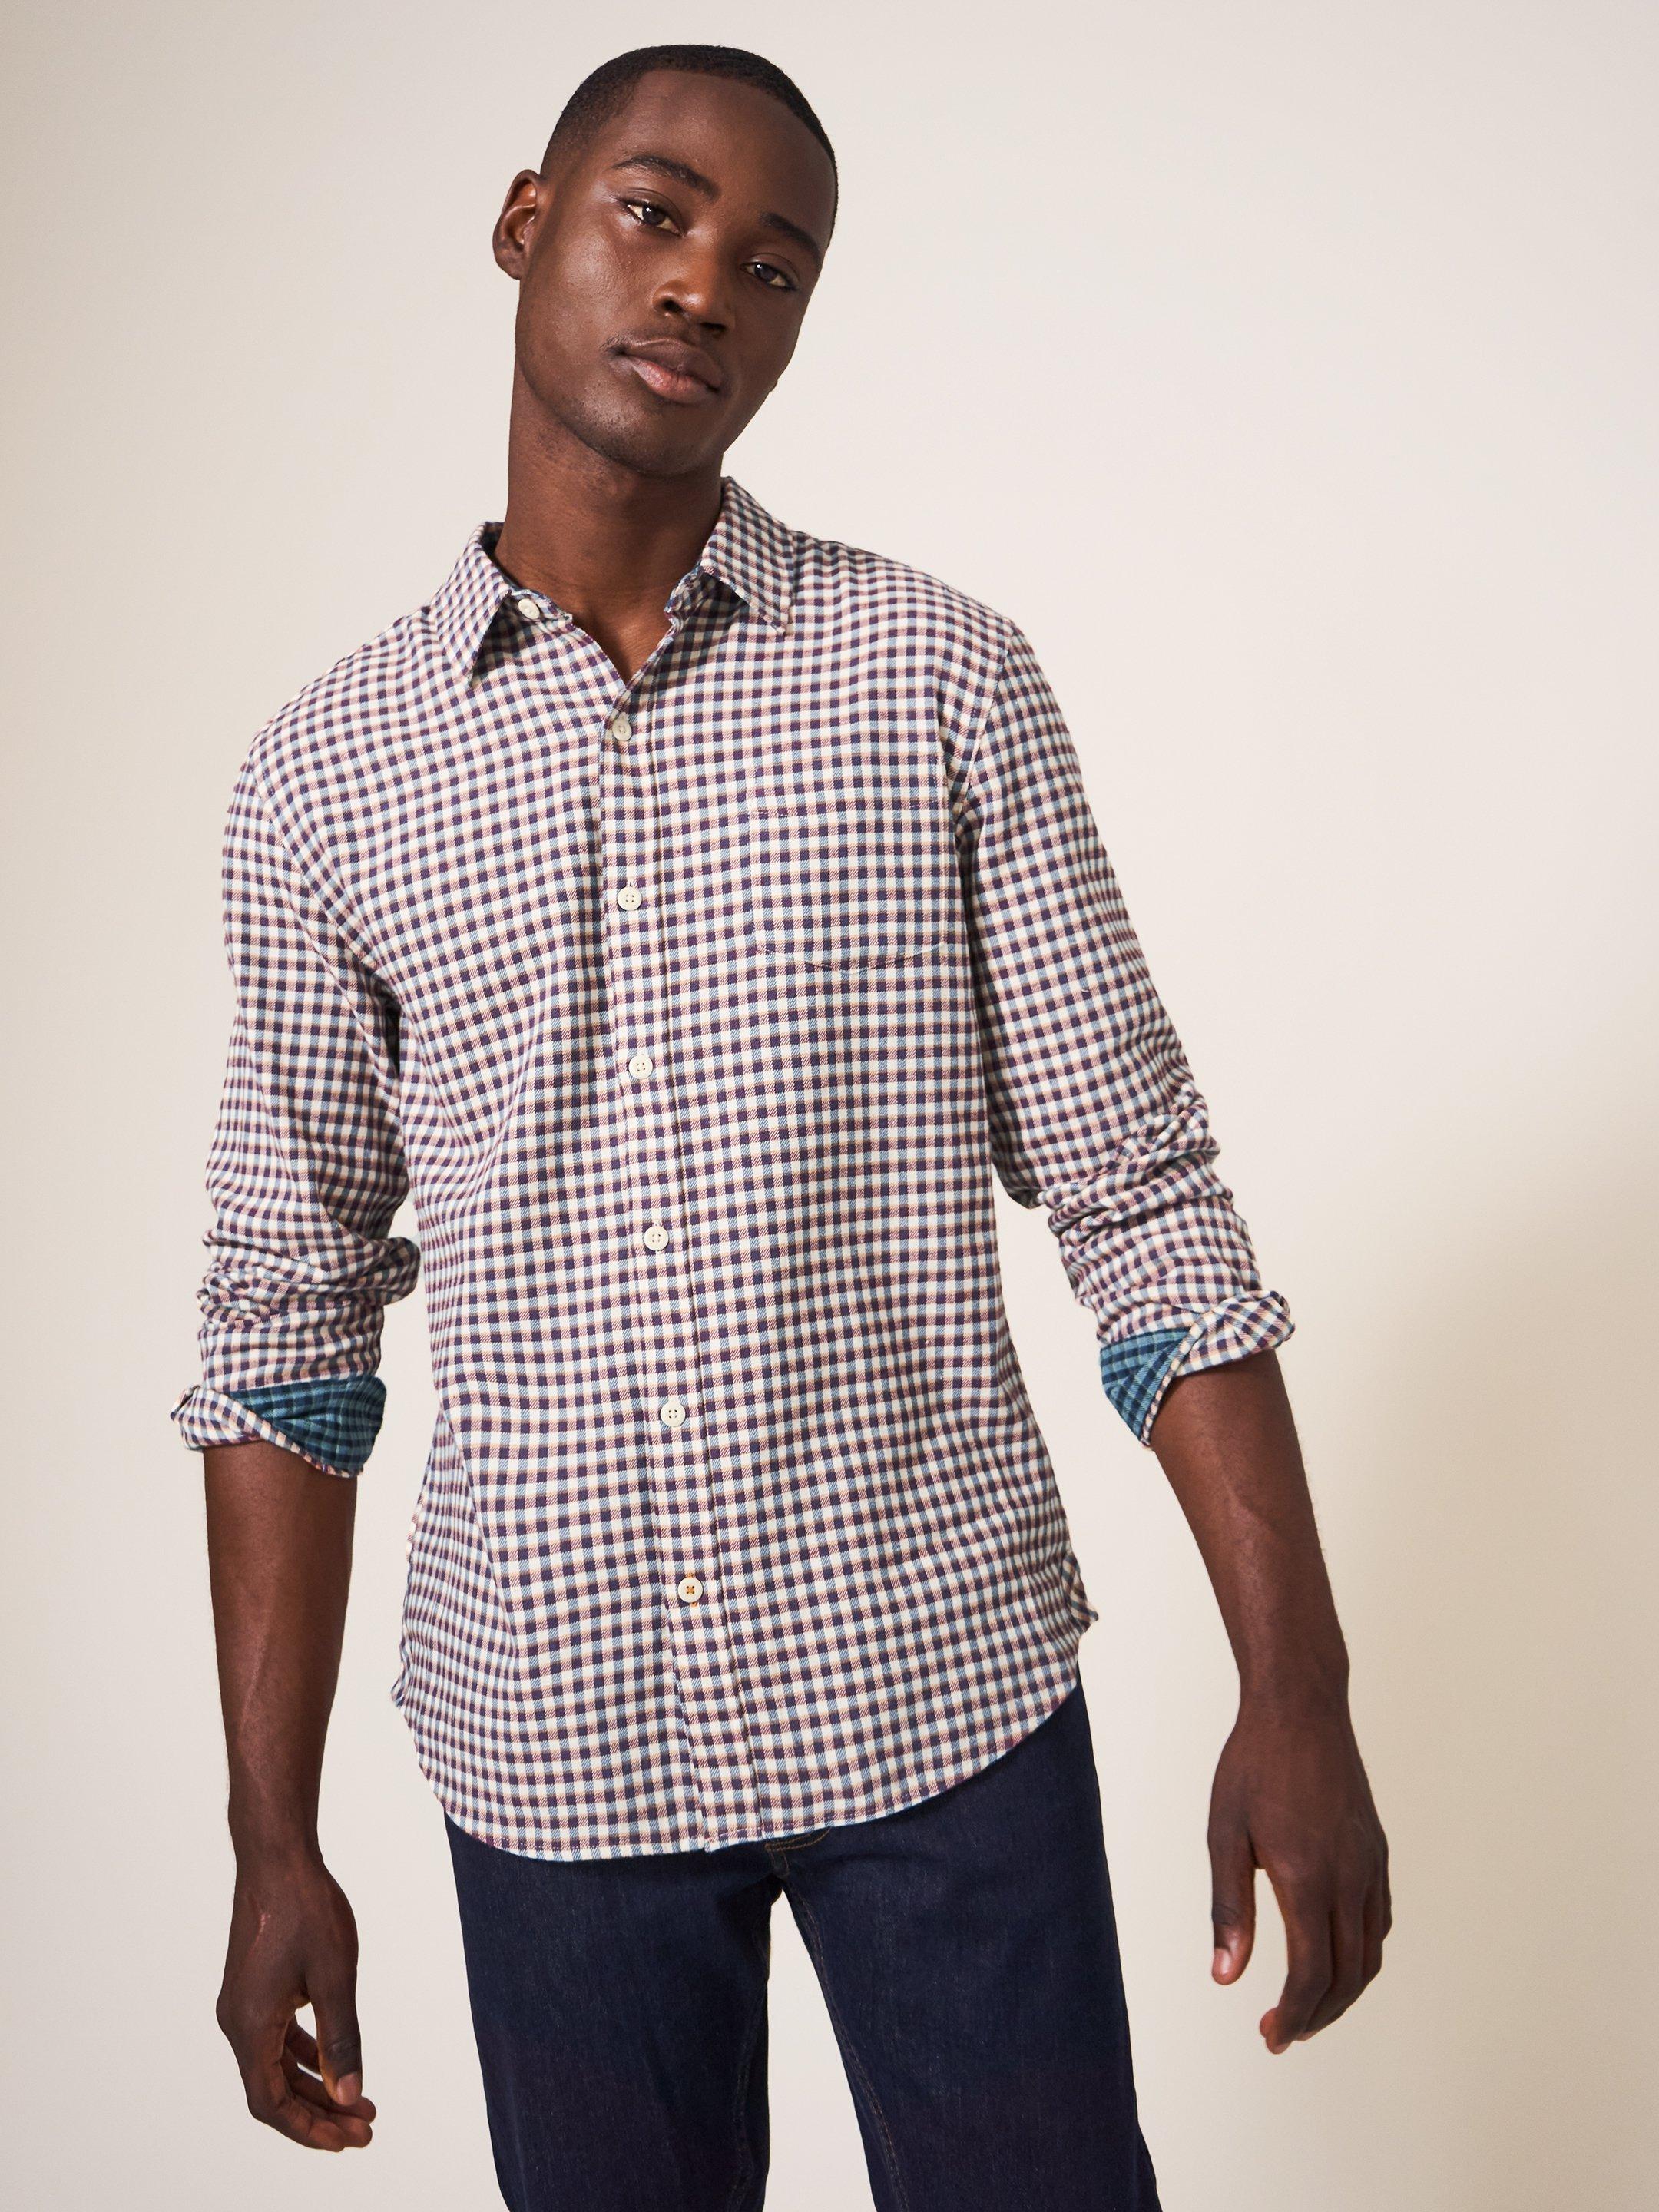 Westlake Gingham Shirt in RED MLT - LIFESTYLE